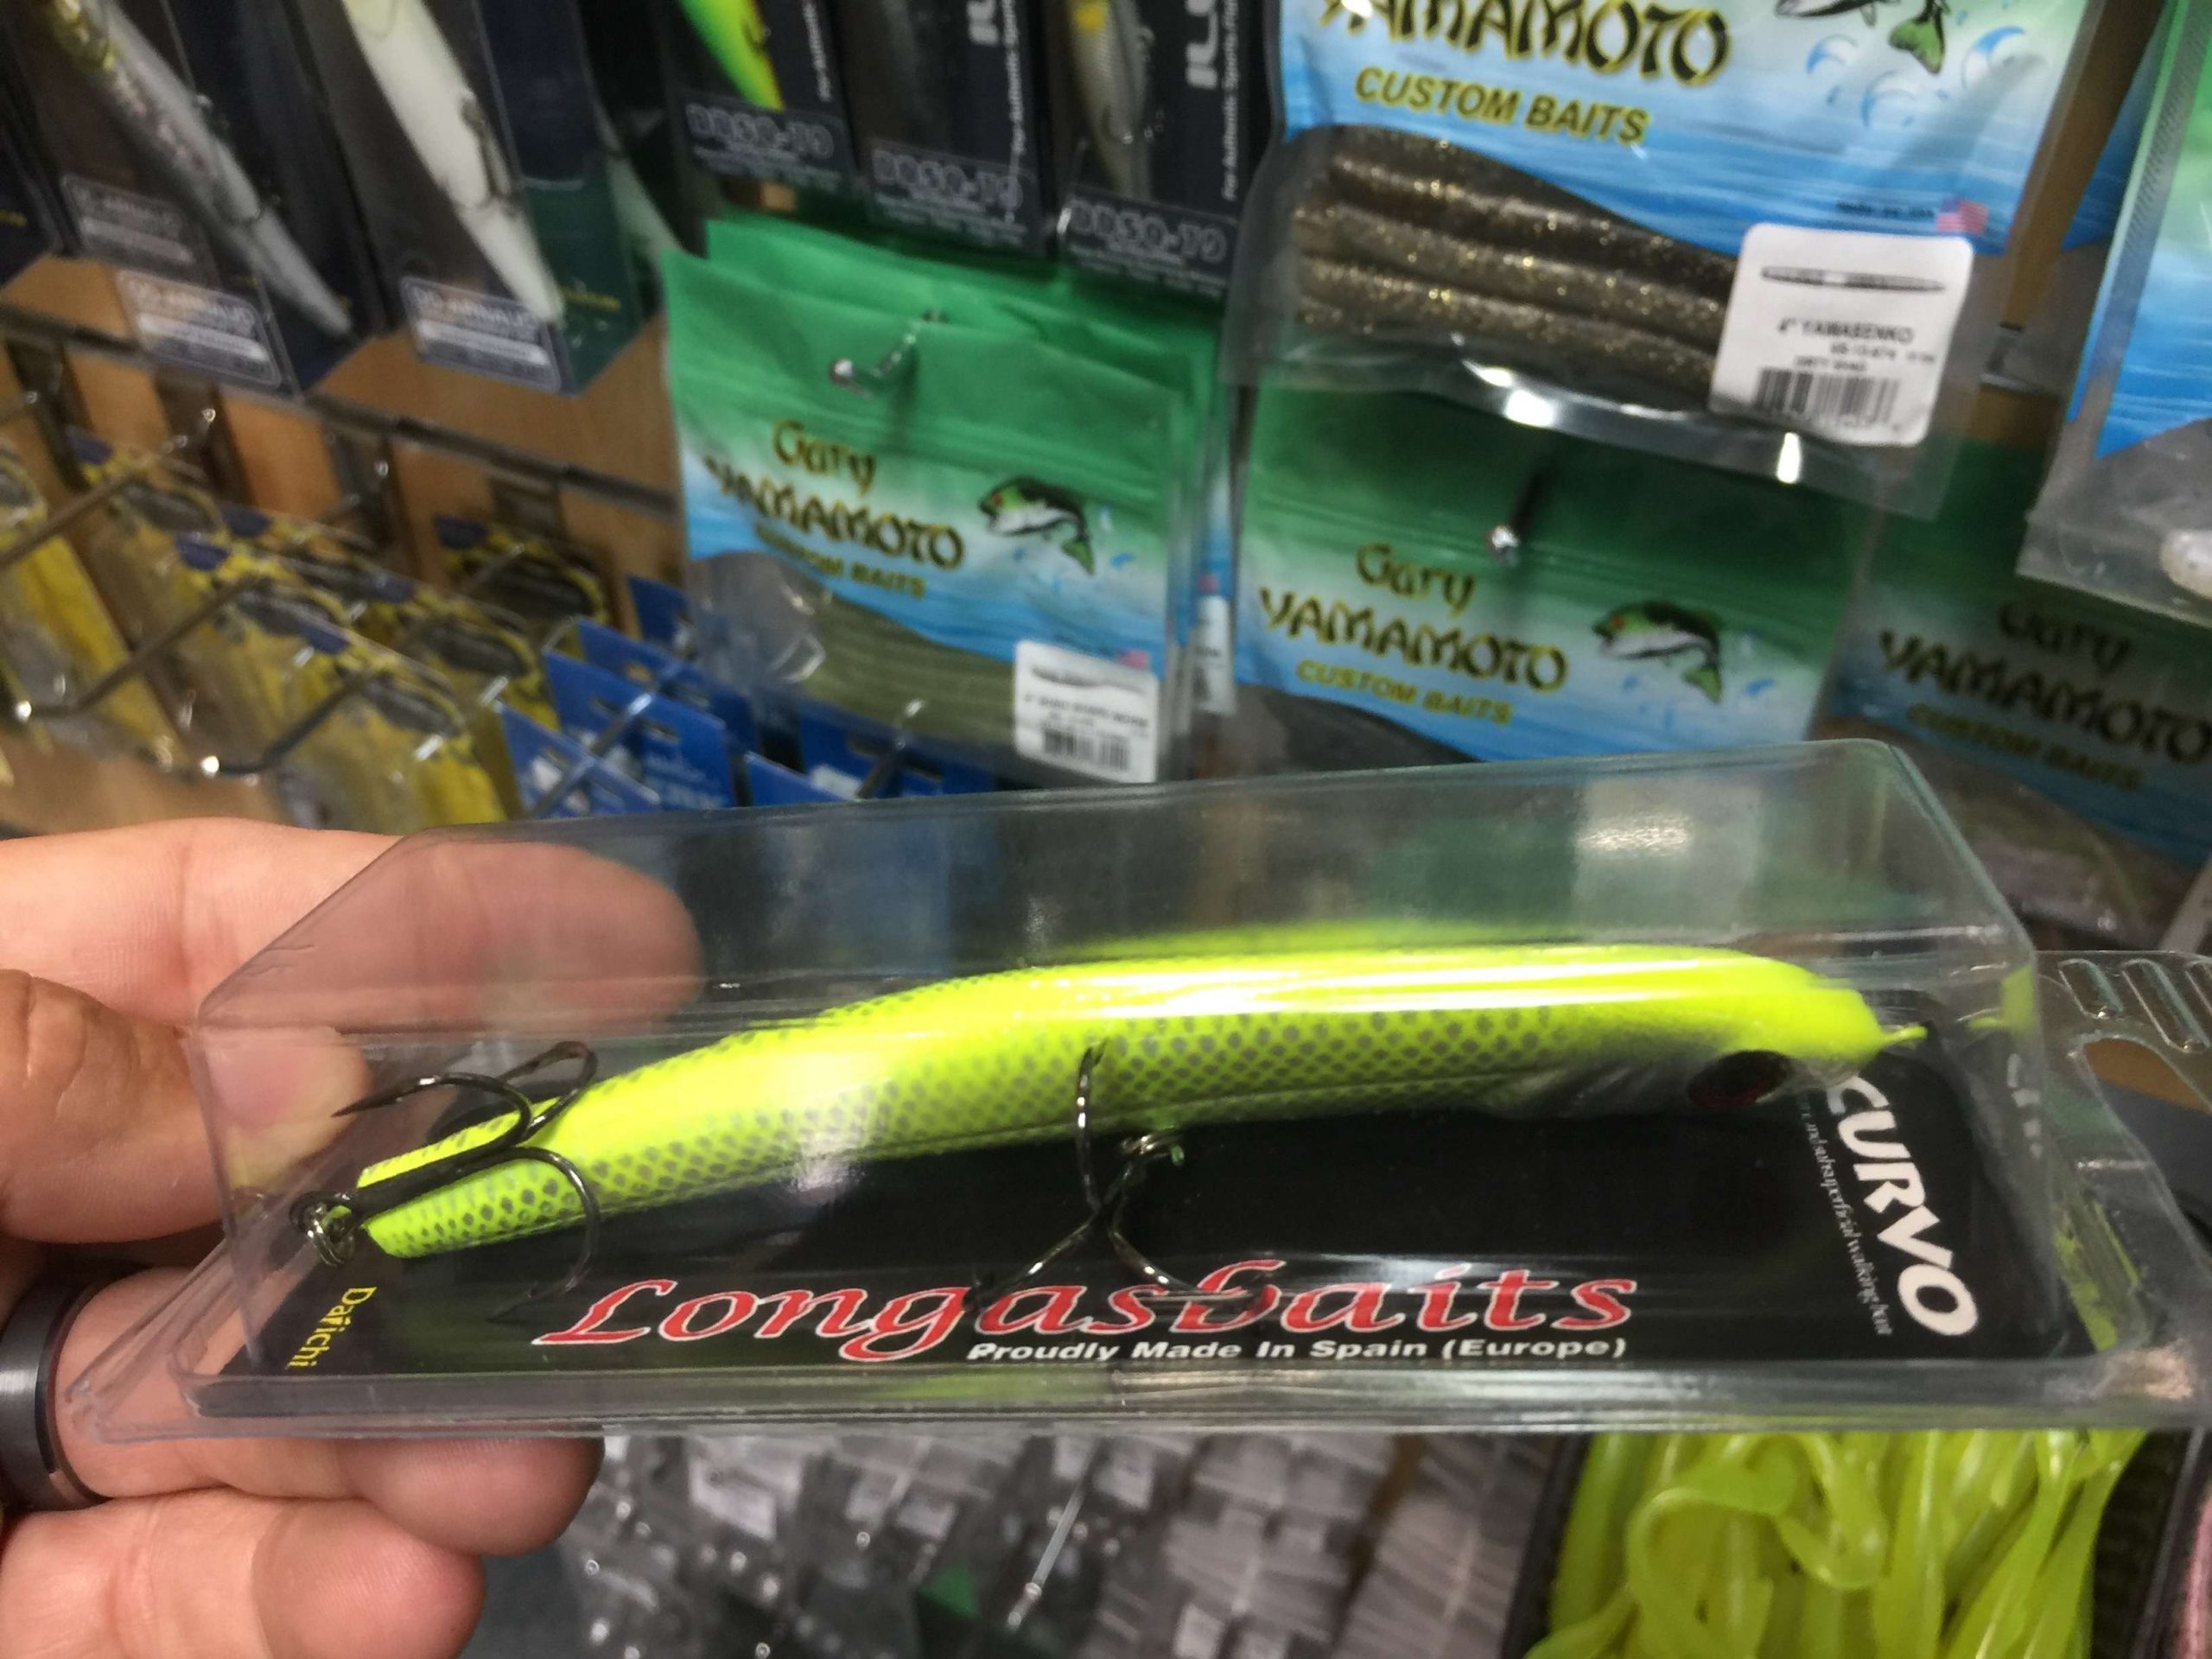 This is the Curvo topwater bait by Longas Baits, one of the most popular brands in Spain. It actually dives under the water a couple of inches before popping back to the surface. Lake Caspe is known for its topwater fishing, and this is one of the local favorites.